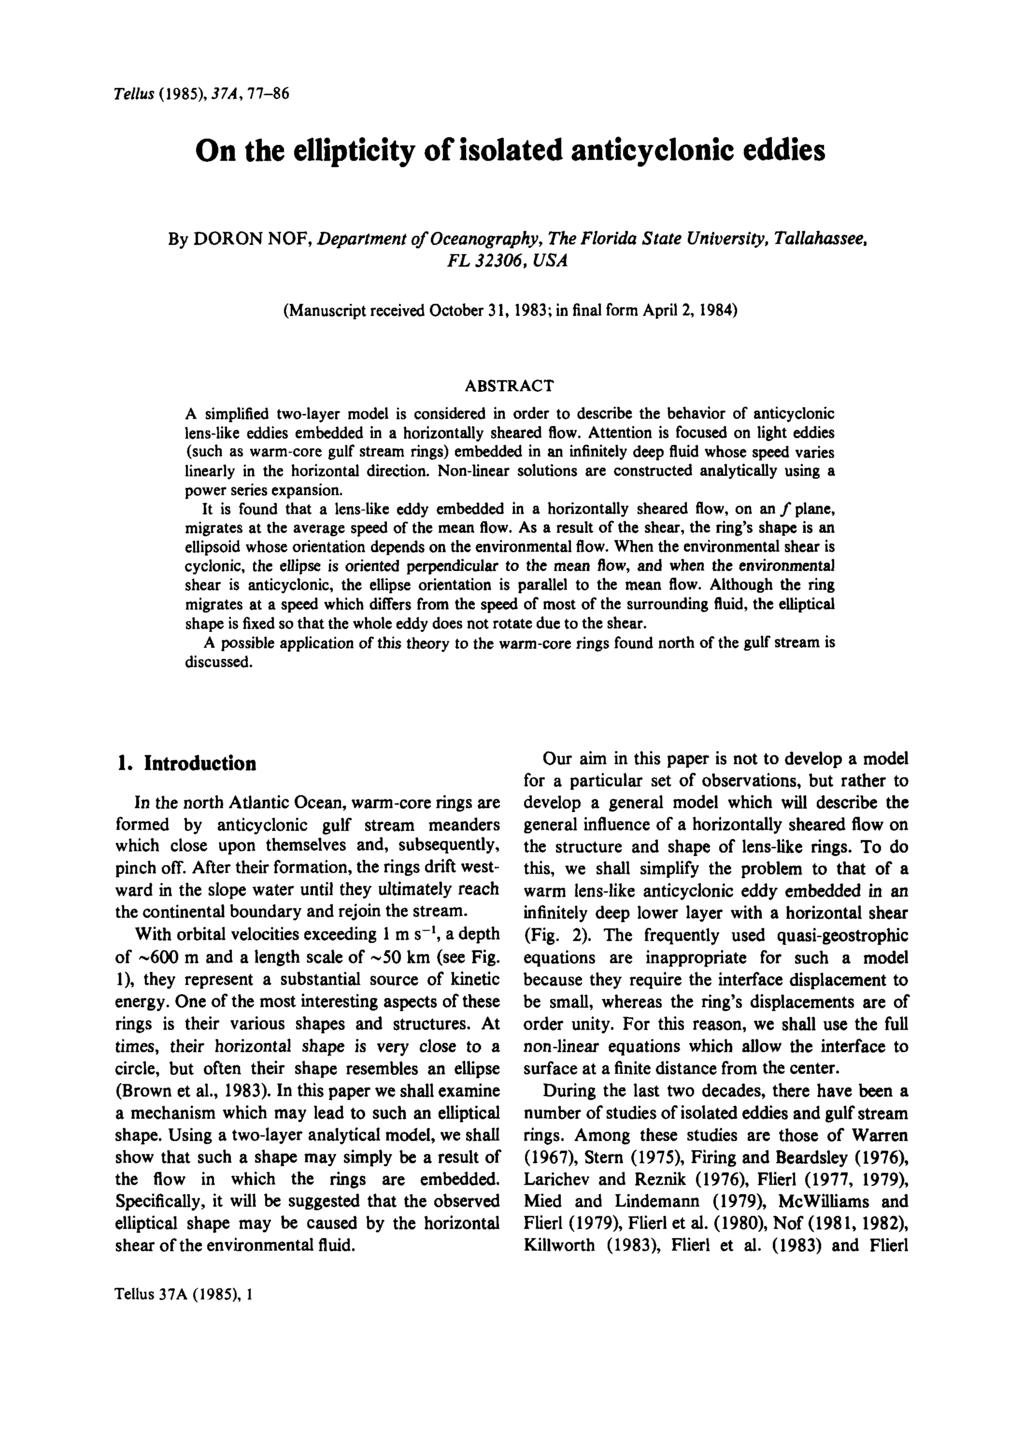 Tellus (1985), 37A, 77-86 On the ellipticity of isolated anticyclonic eddies By DORON NOF, Department of Oceanography, The Florida State University, Tallahassee, FL 32306, USA (Manuscript received